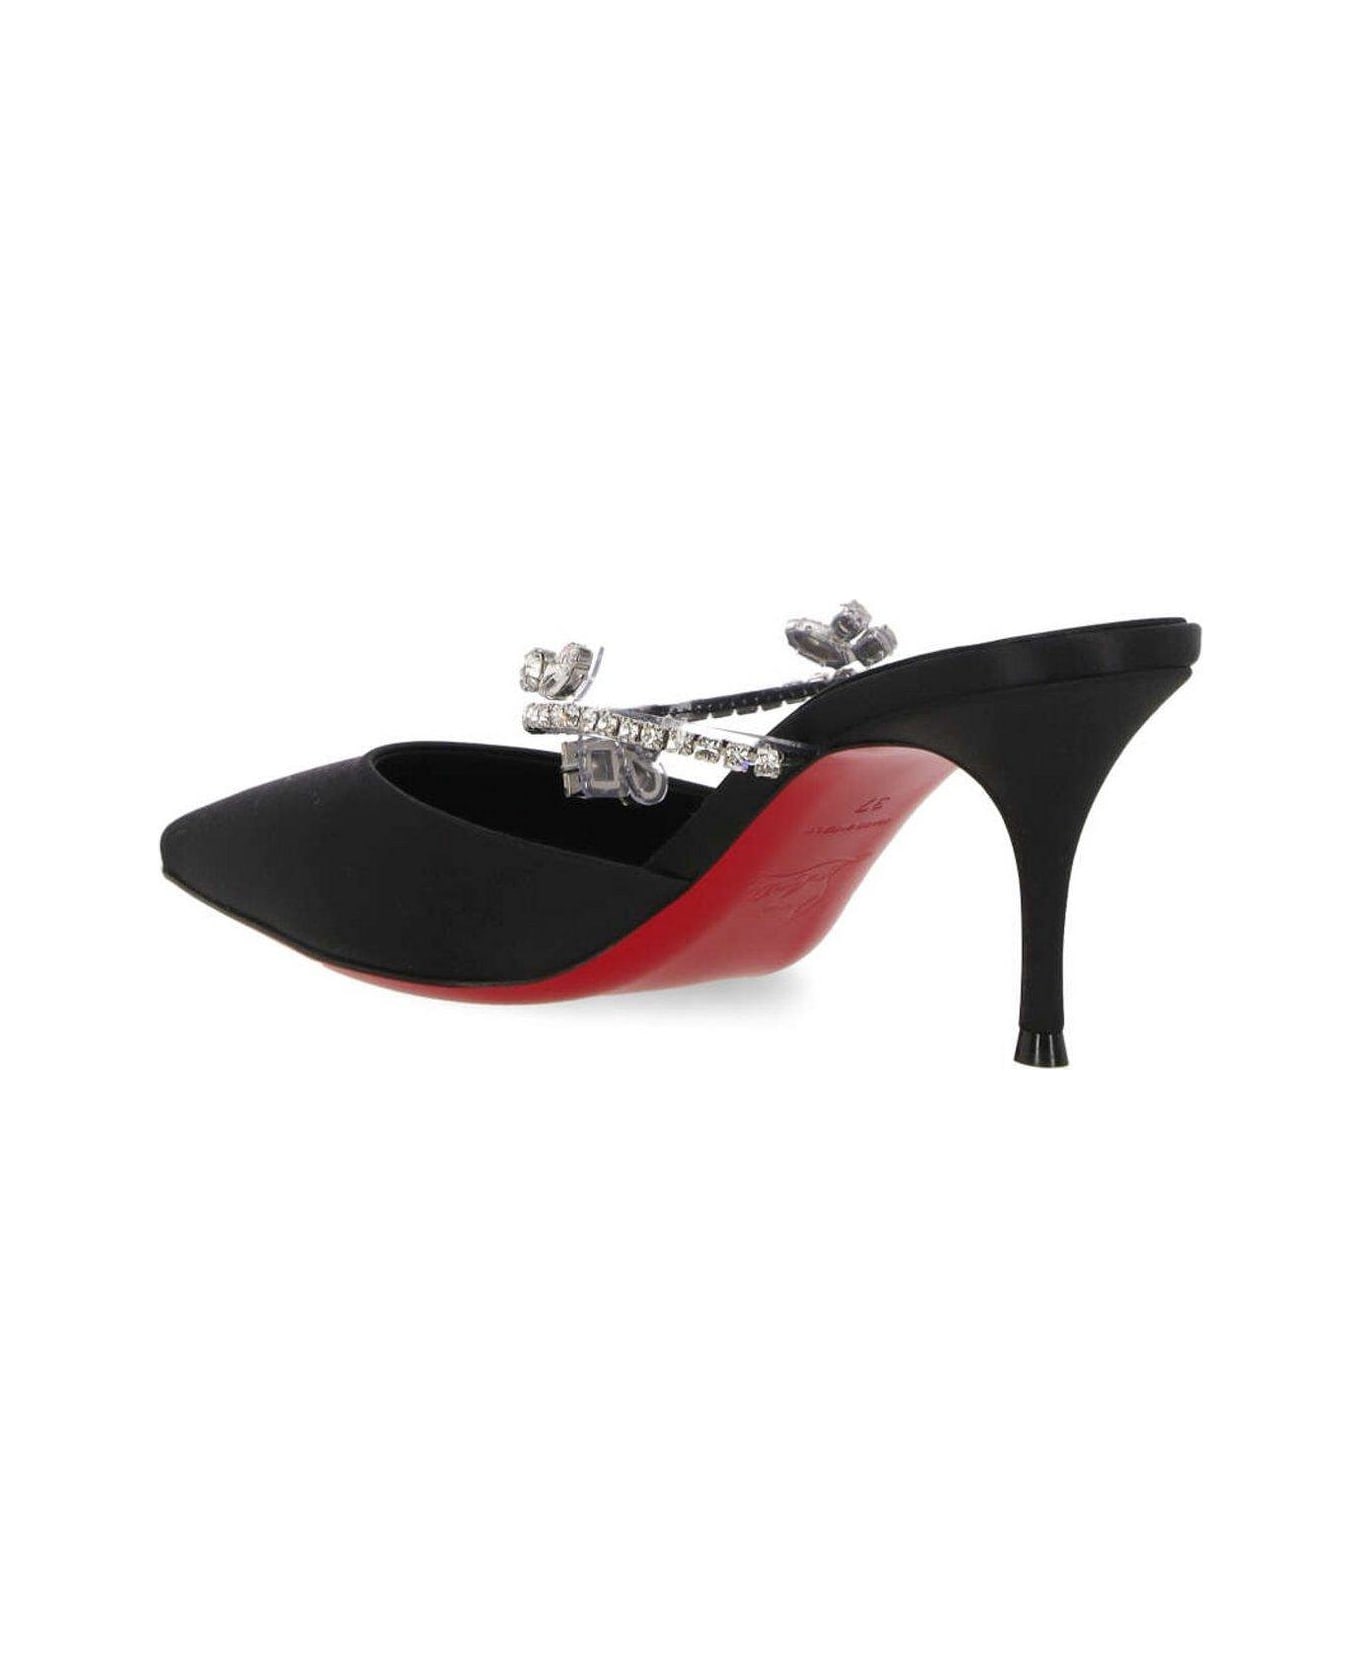 Christian Louboutin Pointed-toe Pumps - Black